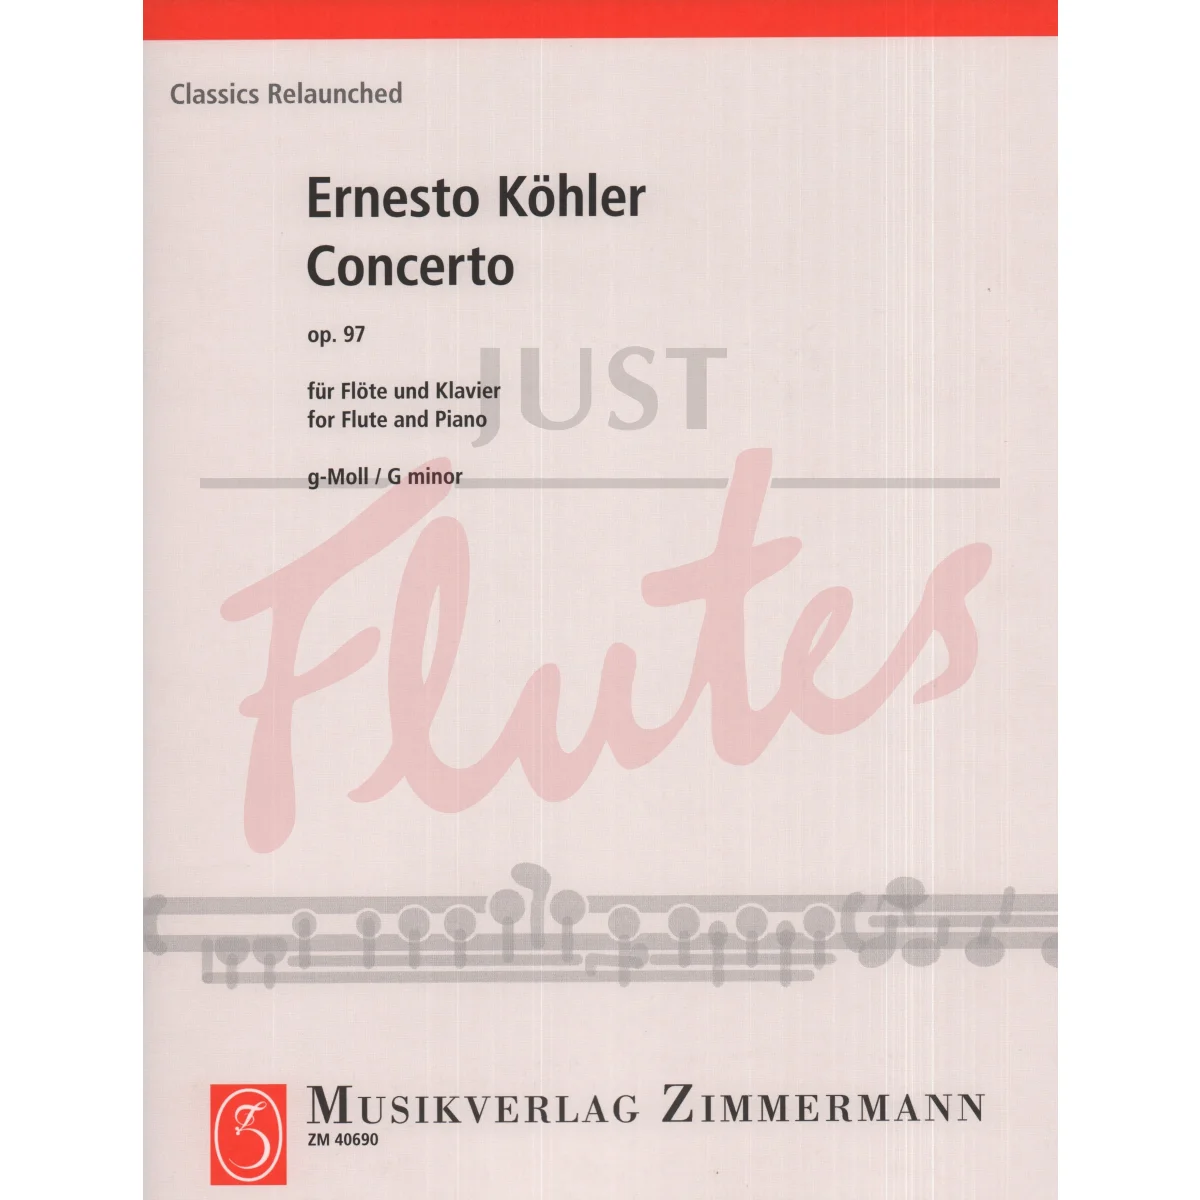 Concerto in G minor for Flute and Piano